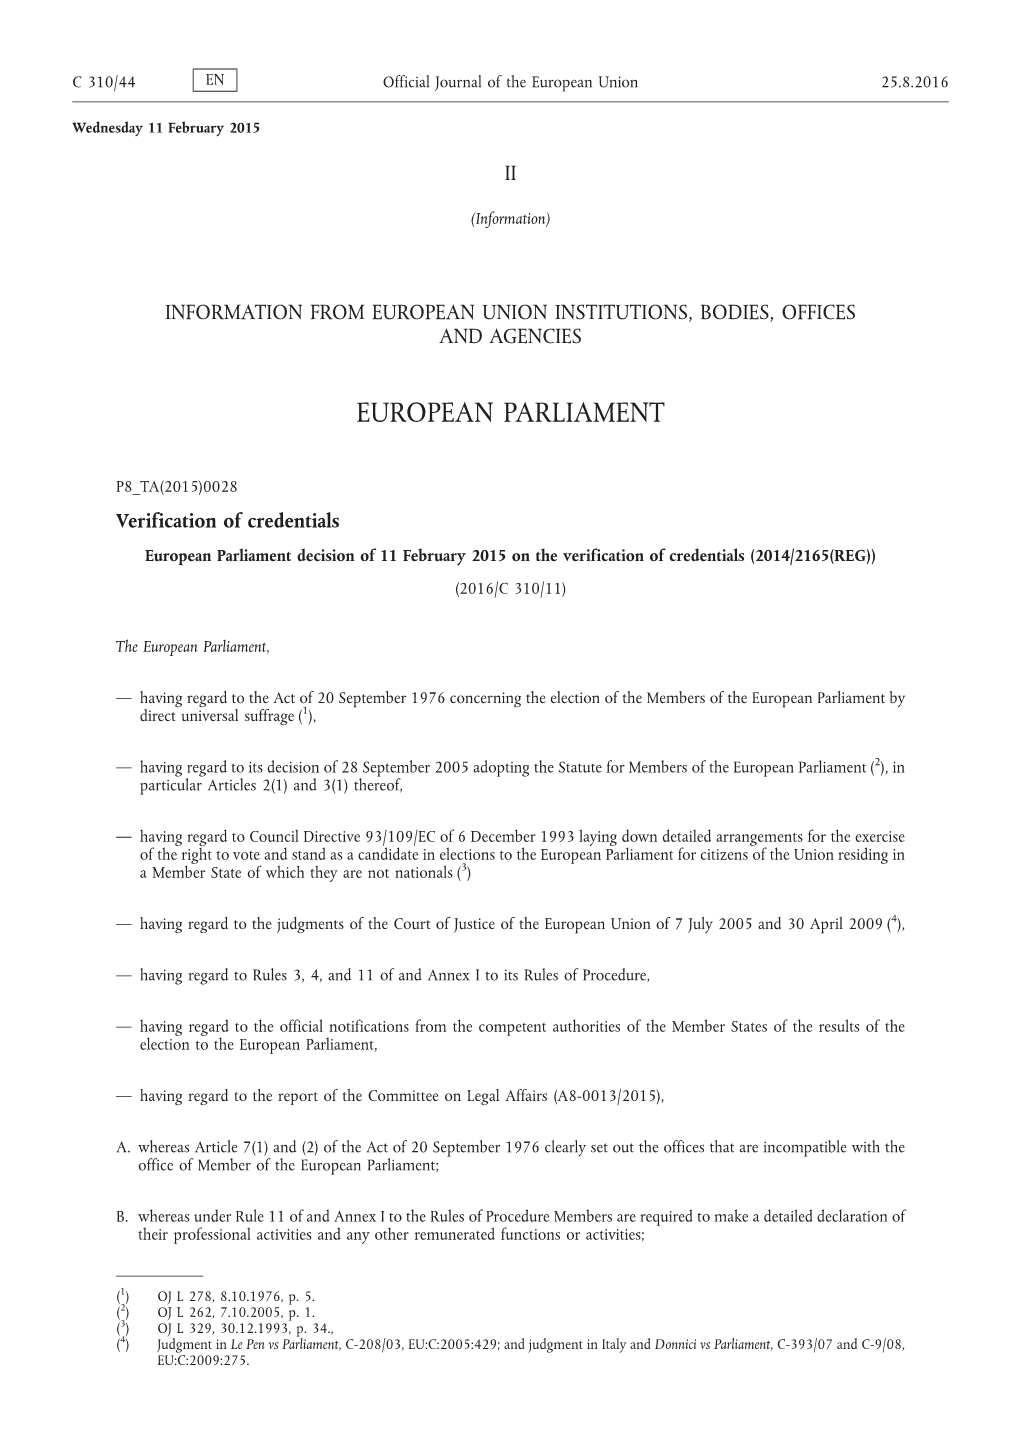 European Parliament Decision of 11 February 2015 on the Verification of Credentials (2014/2165(REG)) (2016/C 310/11)